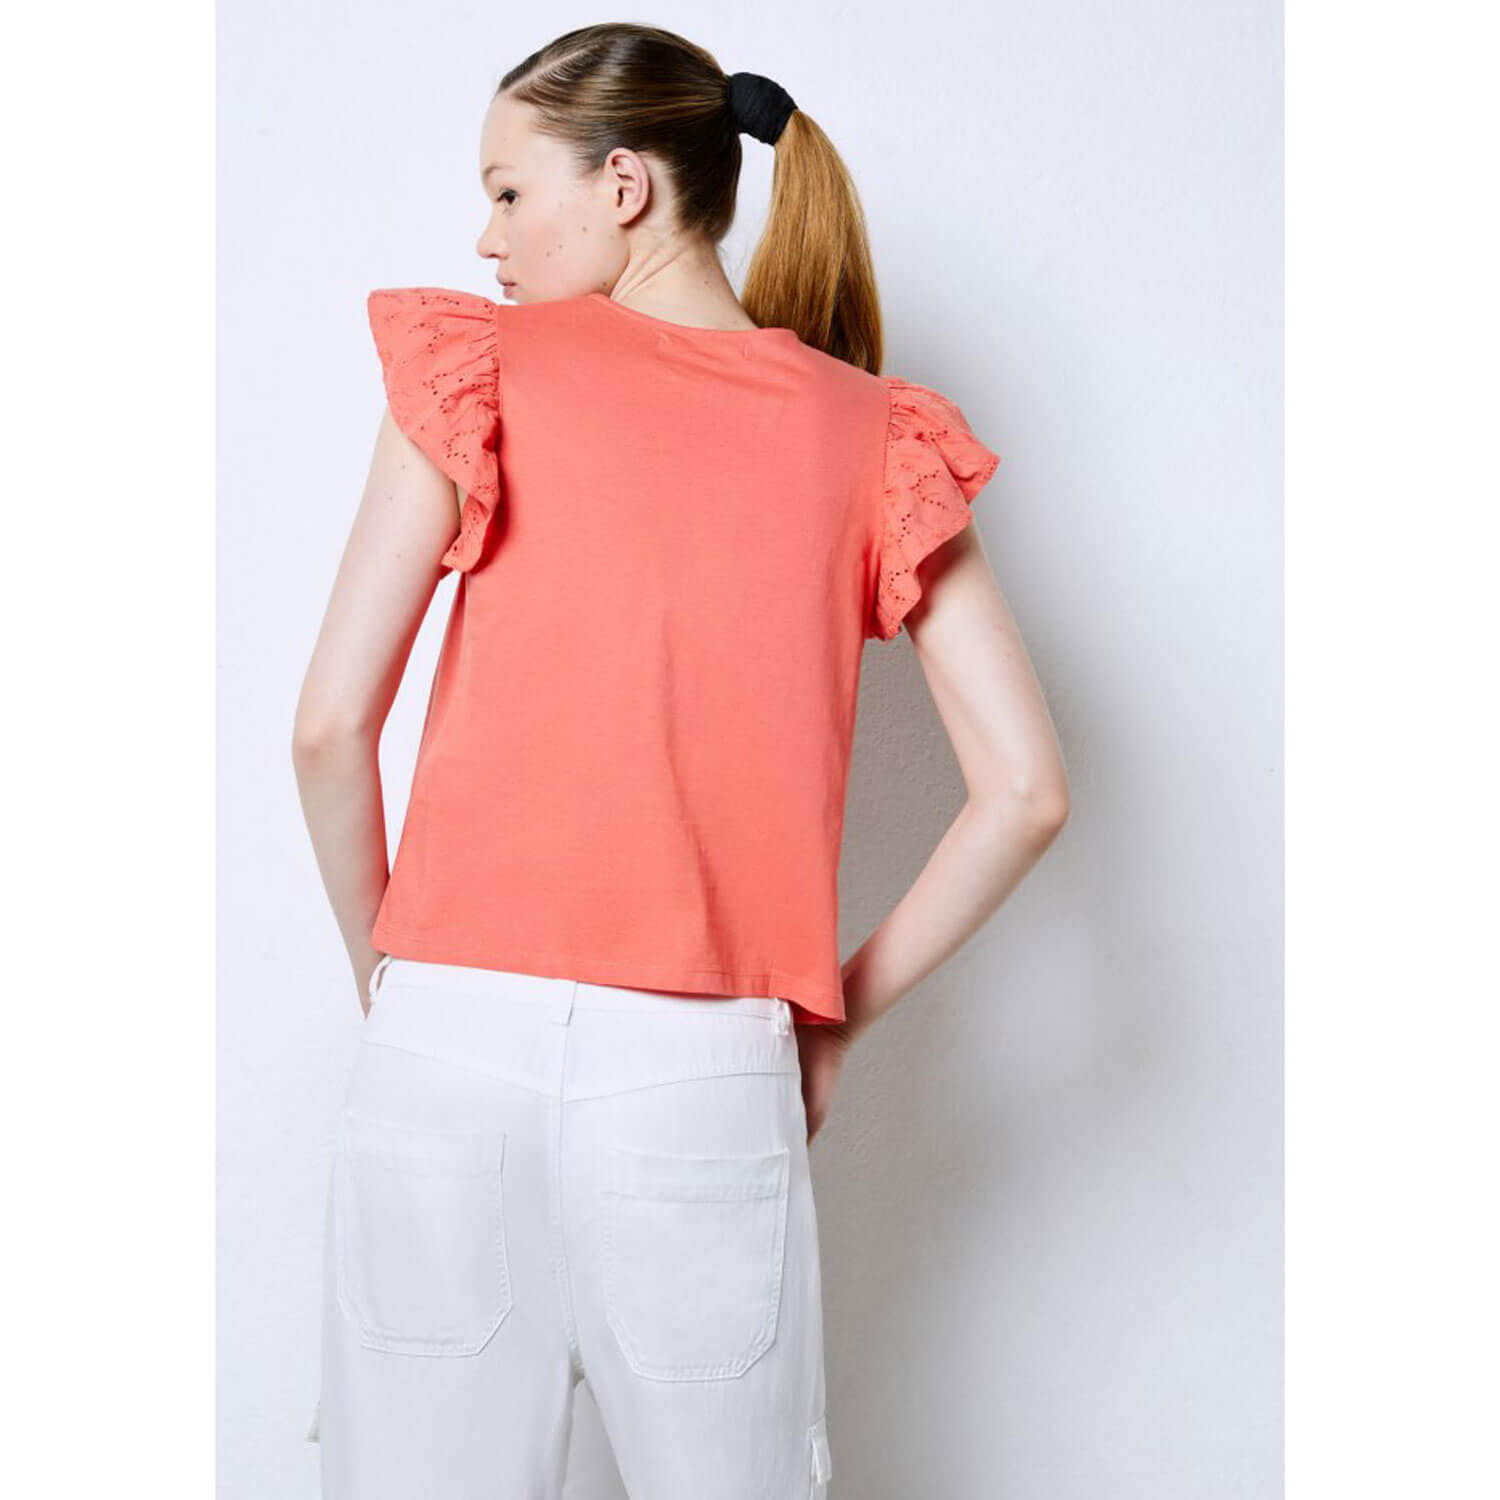 Sfera Embroidered Top 5 Shaws Department Stores